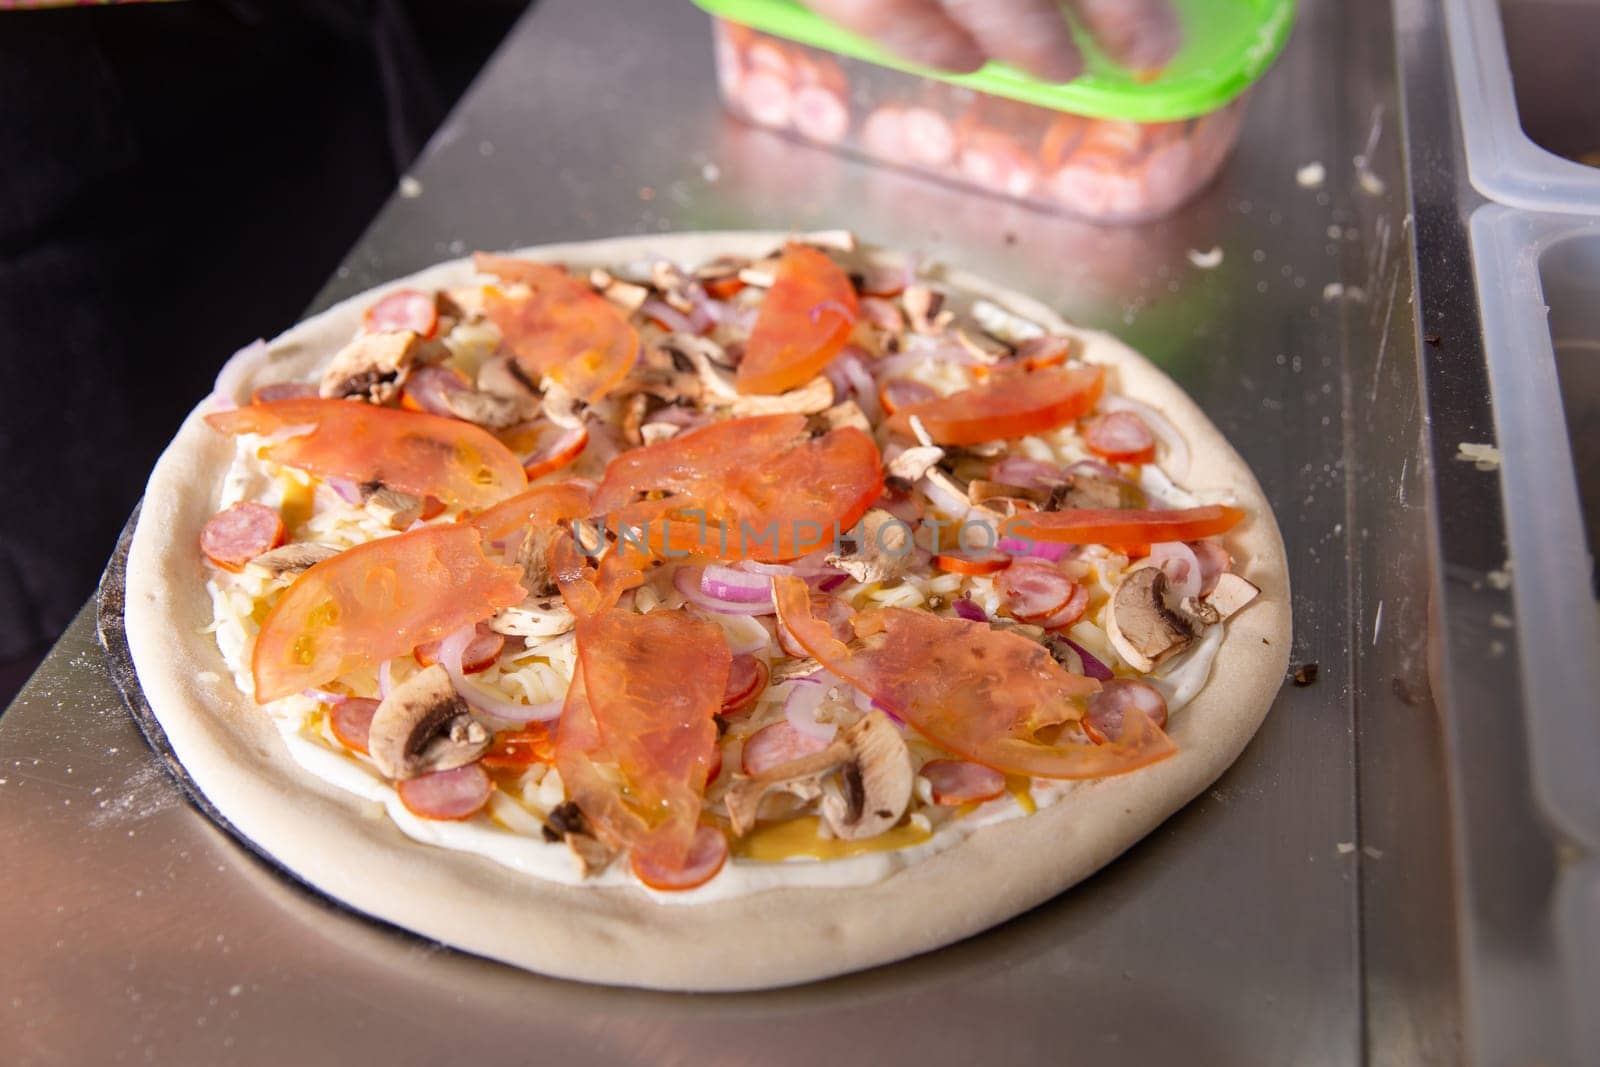 The chef prepares a classic Italian pizza with sausages, mushrooms and tomatoes. by BY-_-BY